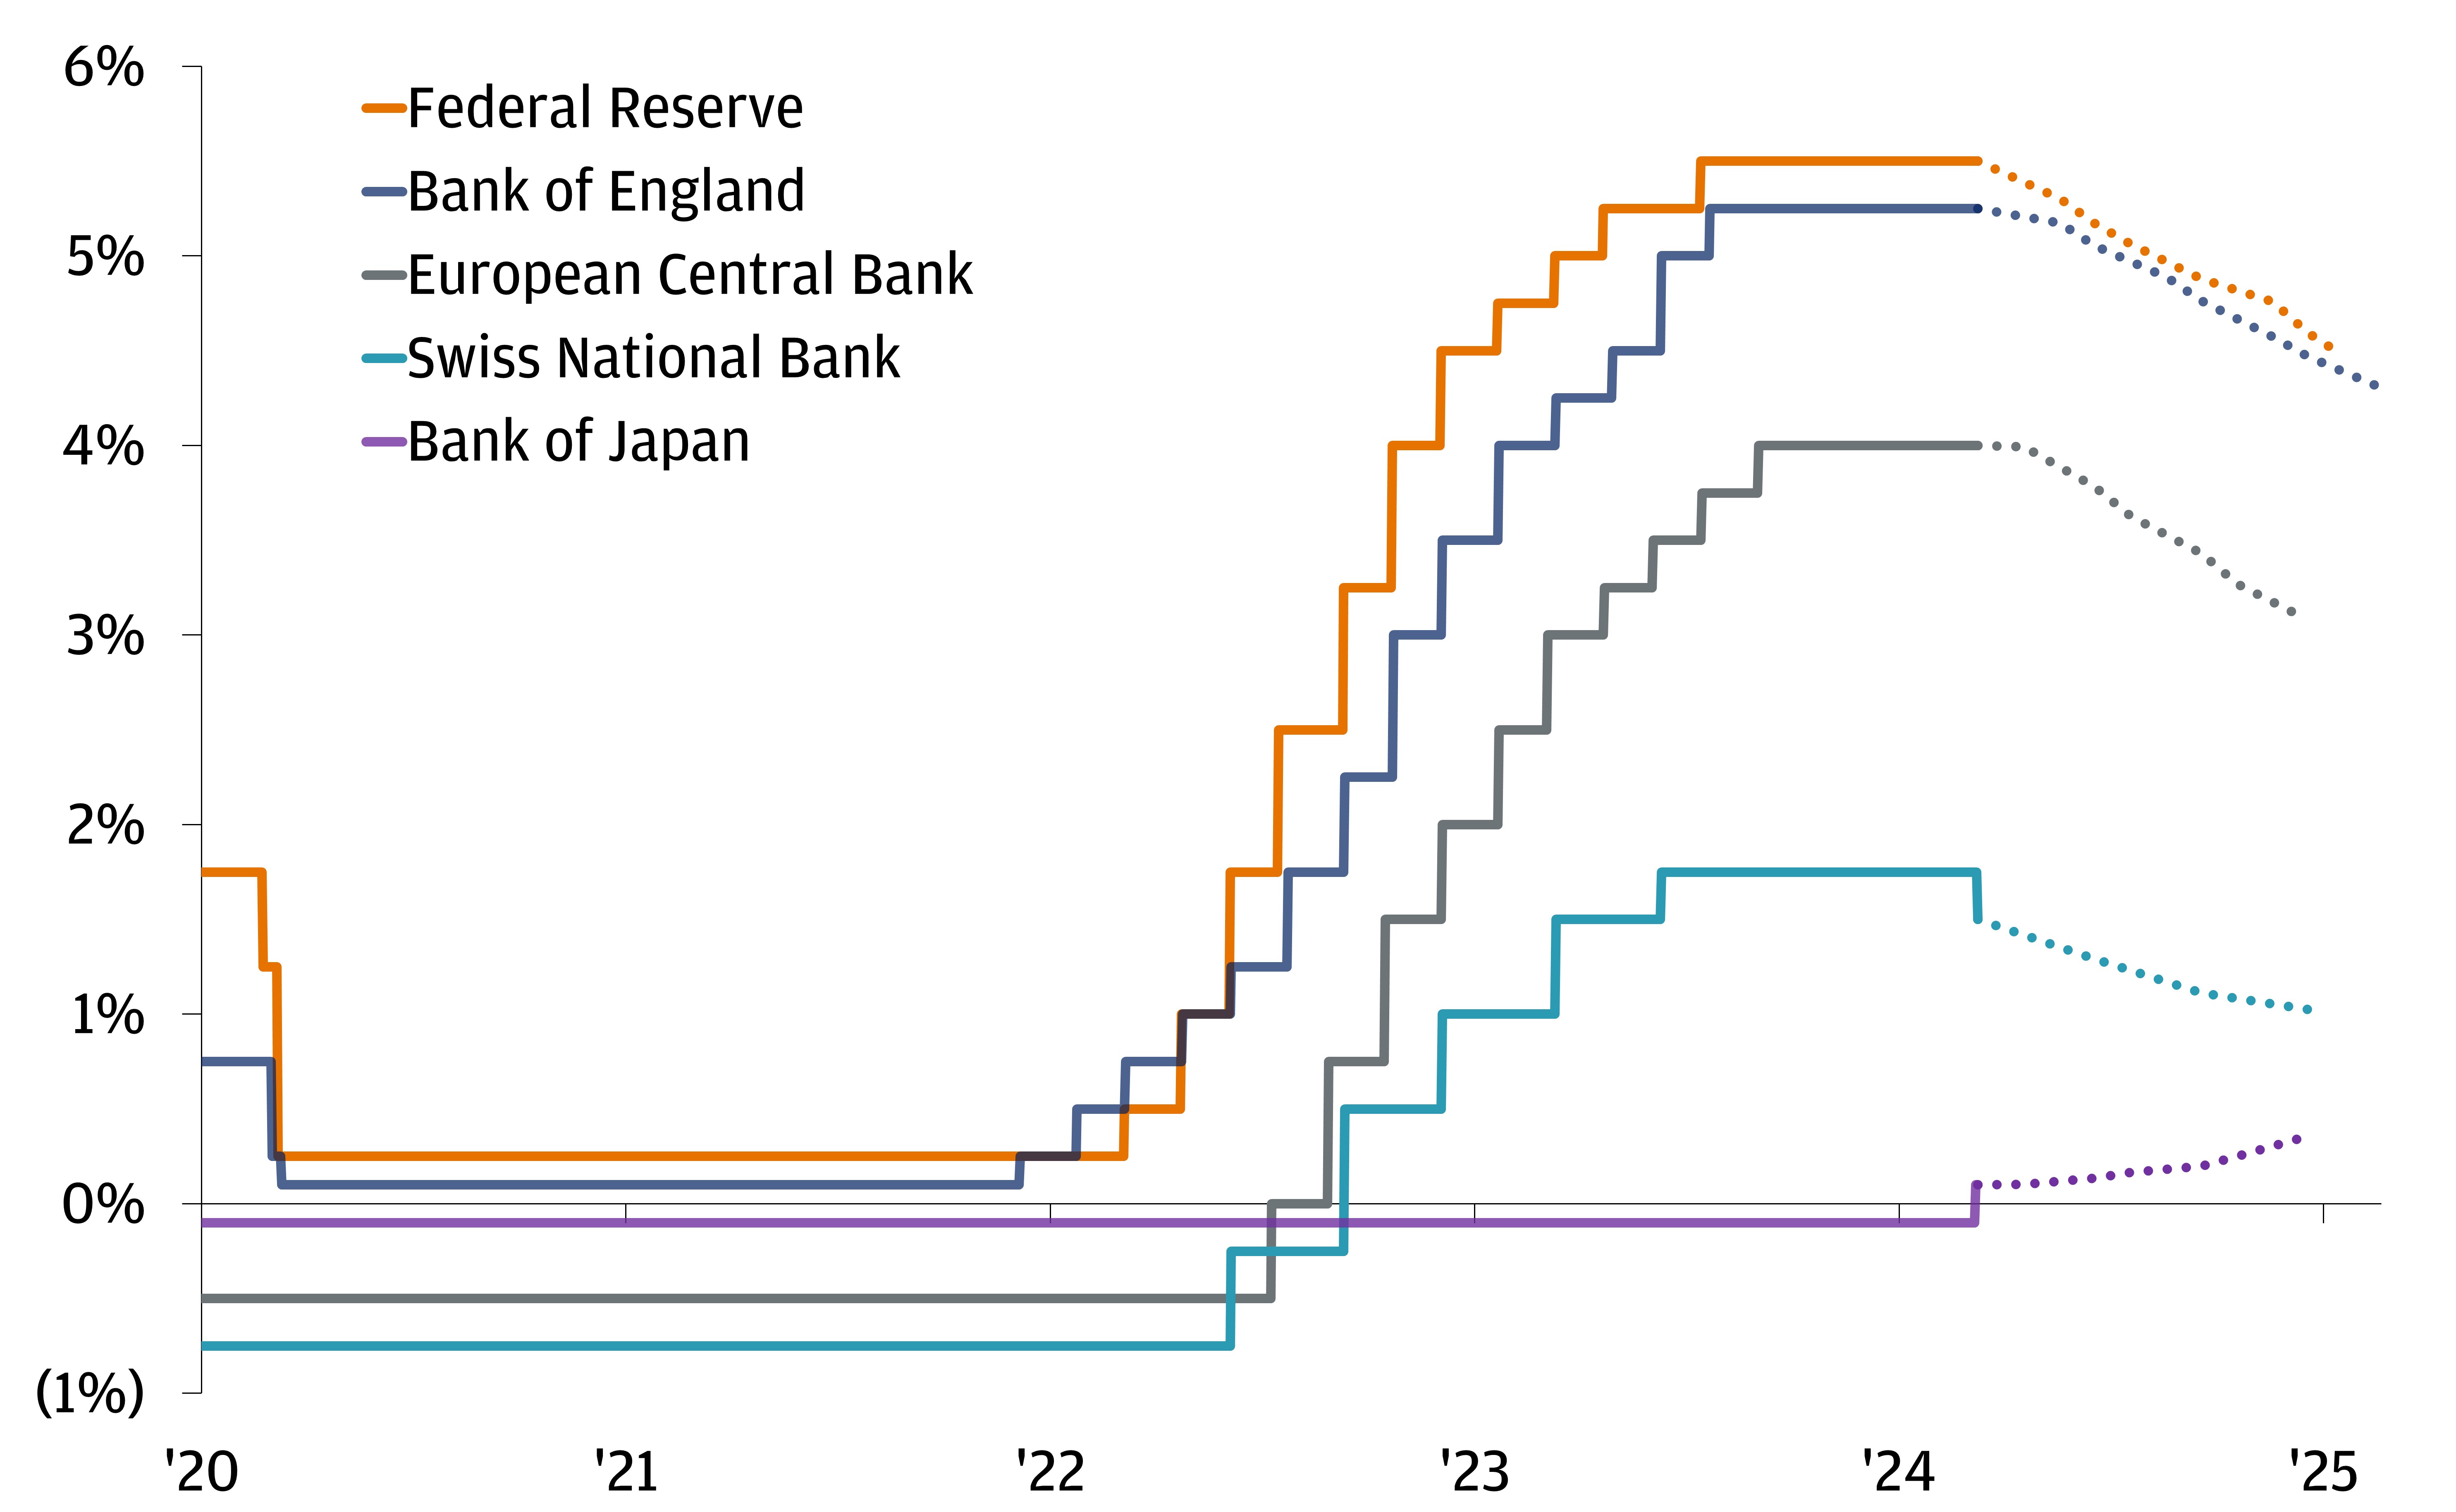 This chart shows central bank policy rates and expectations, for the Federal Reserve, Bank of England, European Central Bank, Swiss National Bank, and the Bank of Japan. 